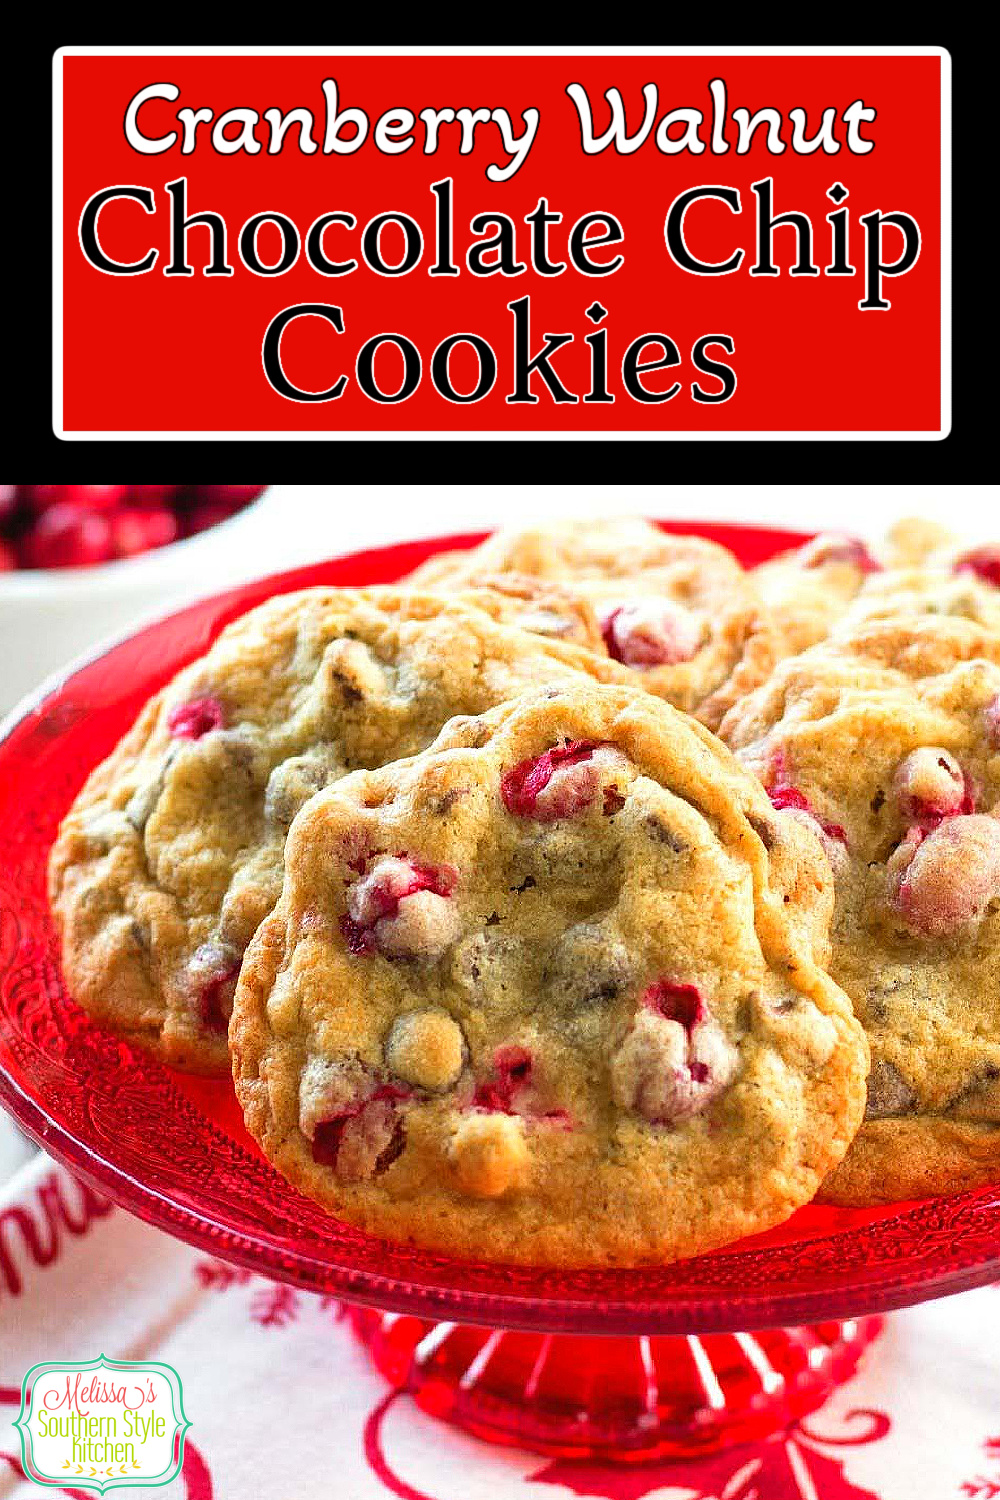 Add these festive Cranberry Walnut Chocolate Chip Cookies to your holiday baking plans #chocolatechipcookies #cranberries #cranberrycookies #cranberrycookierecipes #christmascookies #cookieswap via @melissasssk